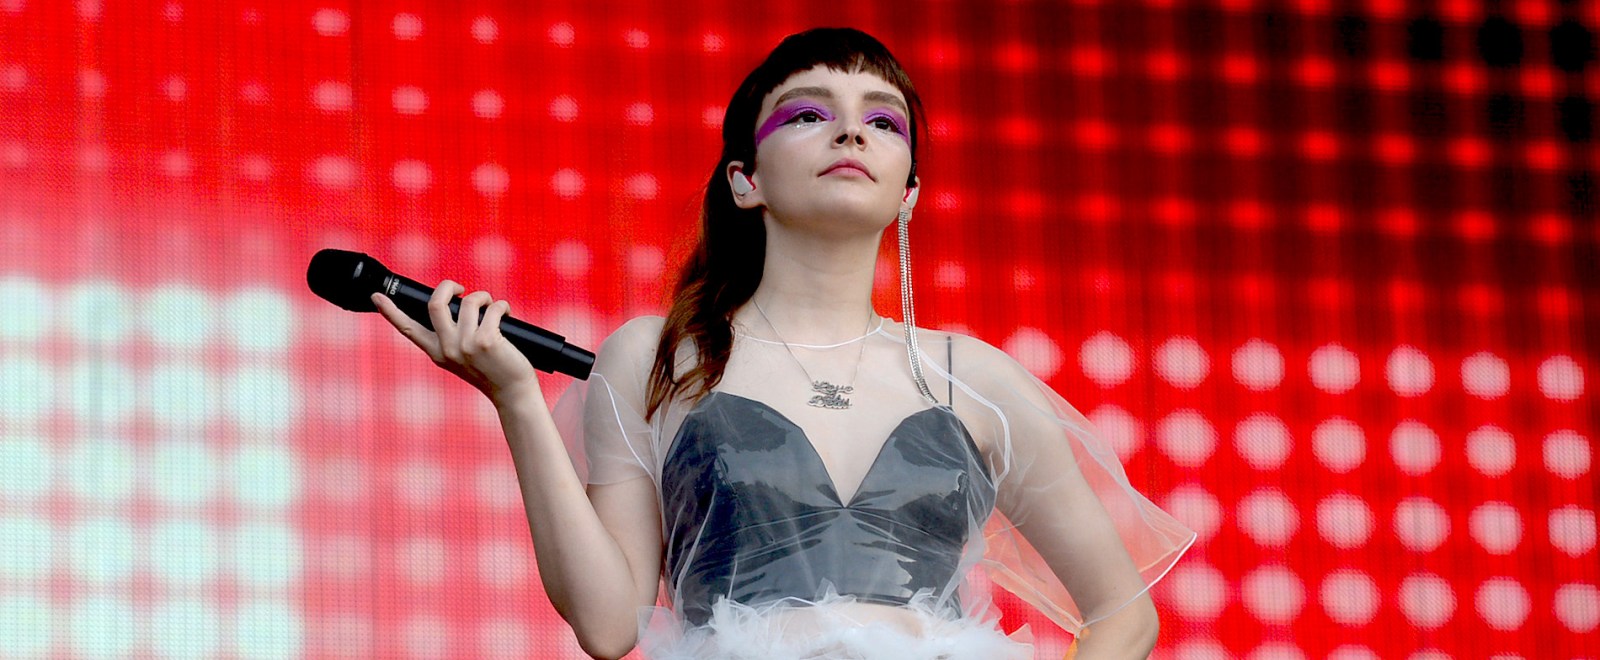 Chvrches Lauren Mayberry Reminisces About Being A Bad Journalist